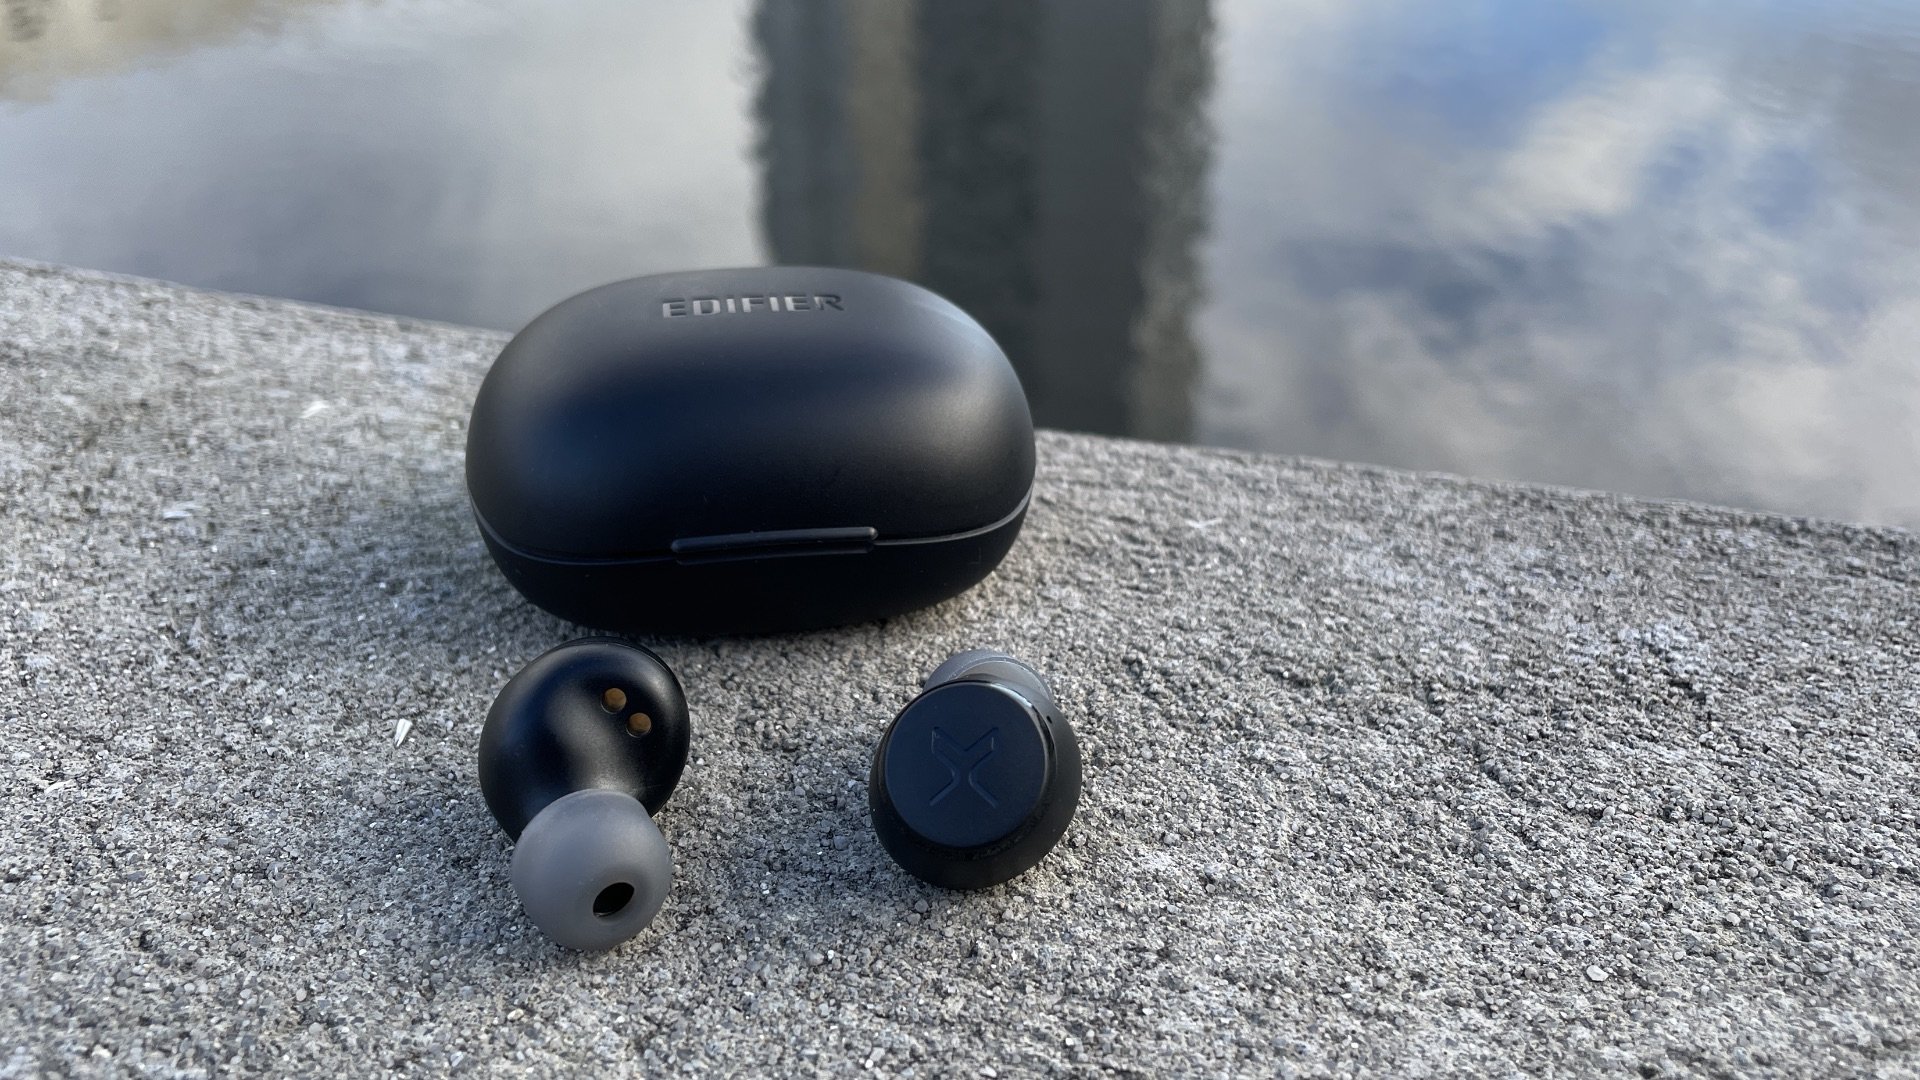 Redmi Lite cheap Buds earbuds for review: sleeping Best 3